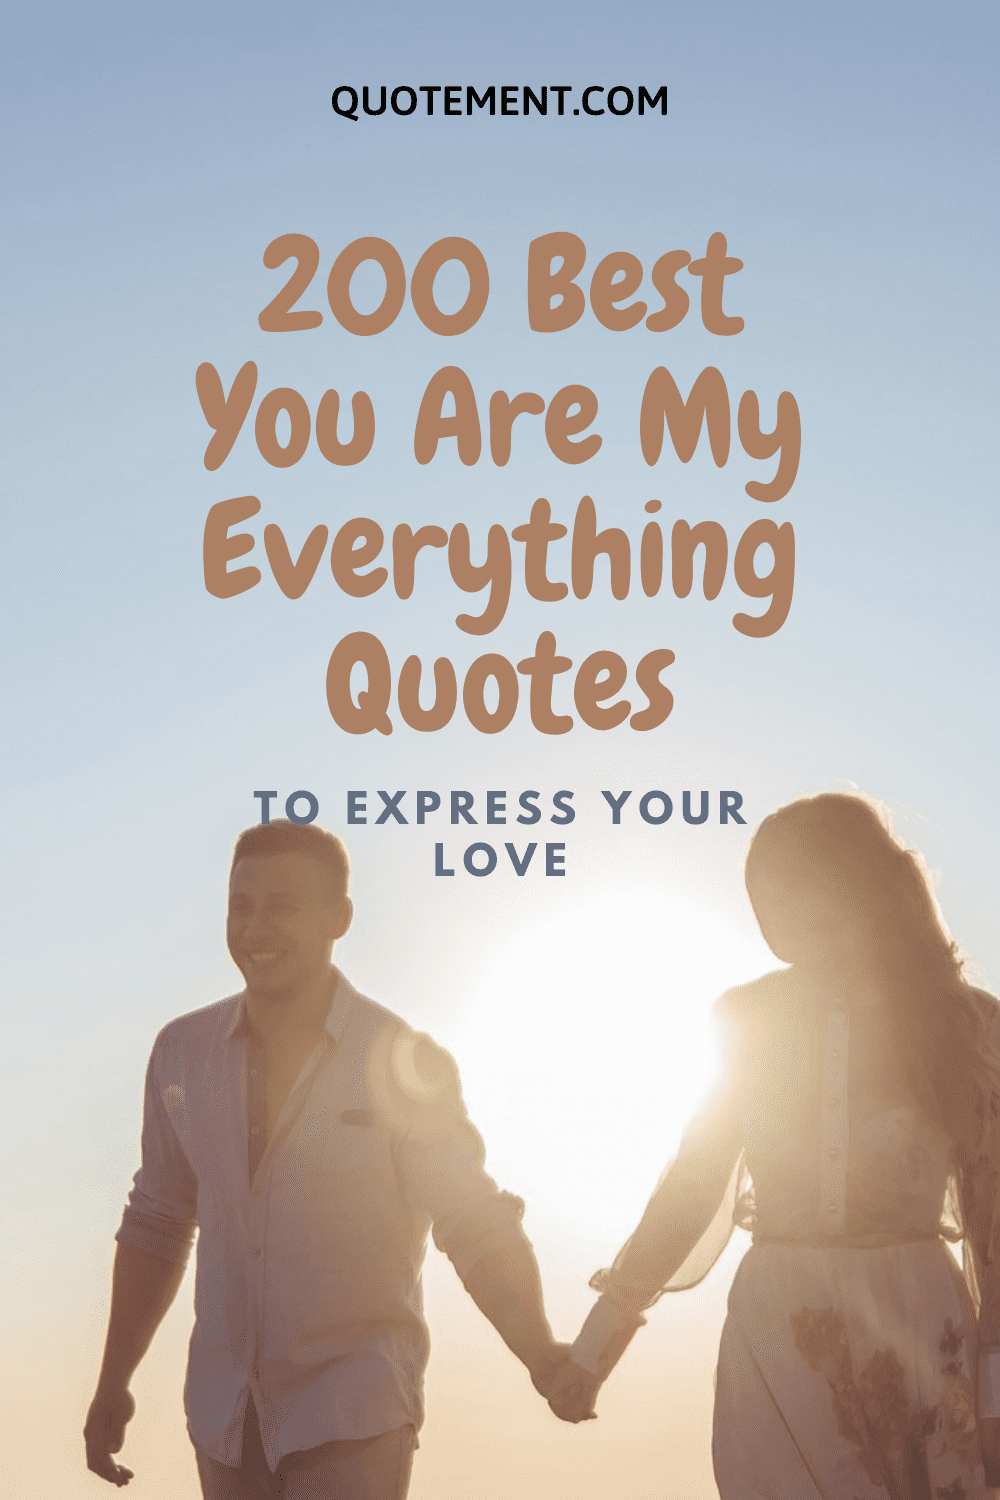 200 Best You Are My Everything Quotes To Express Your Love 